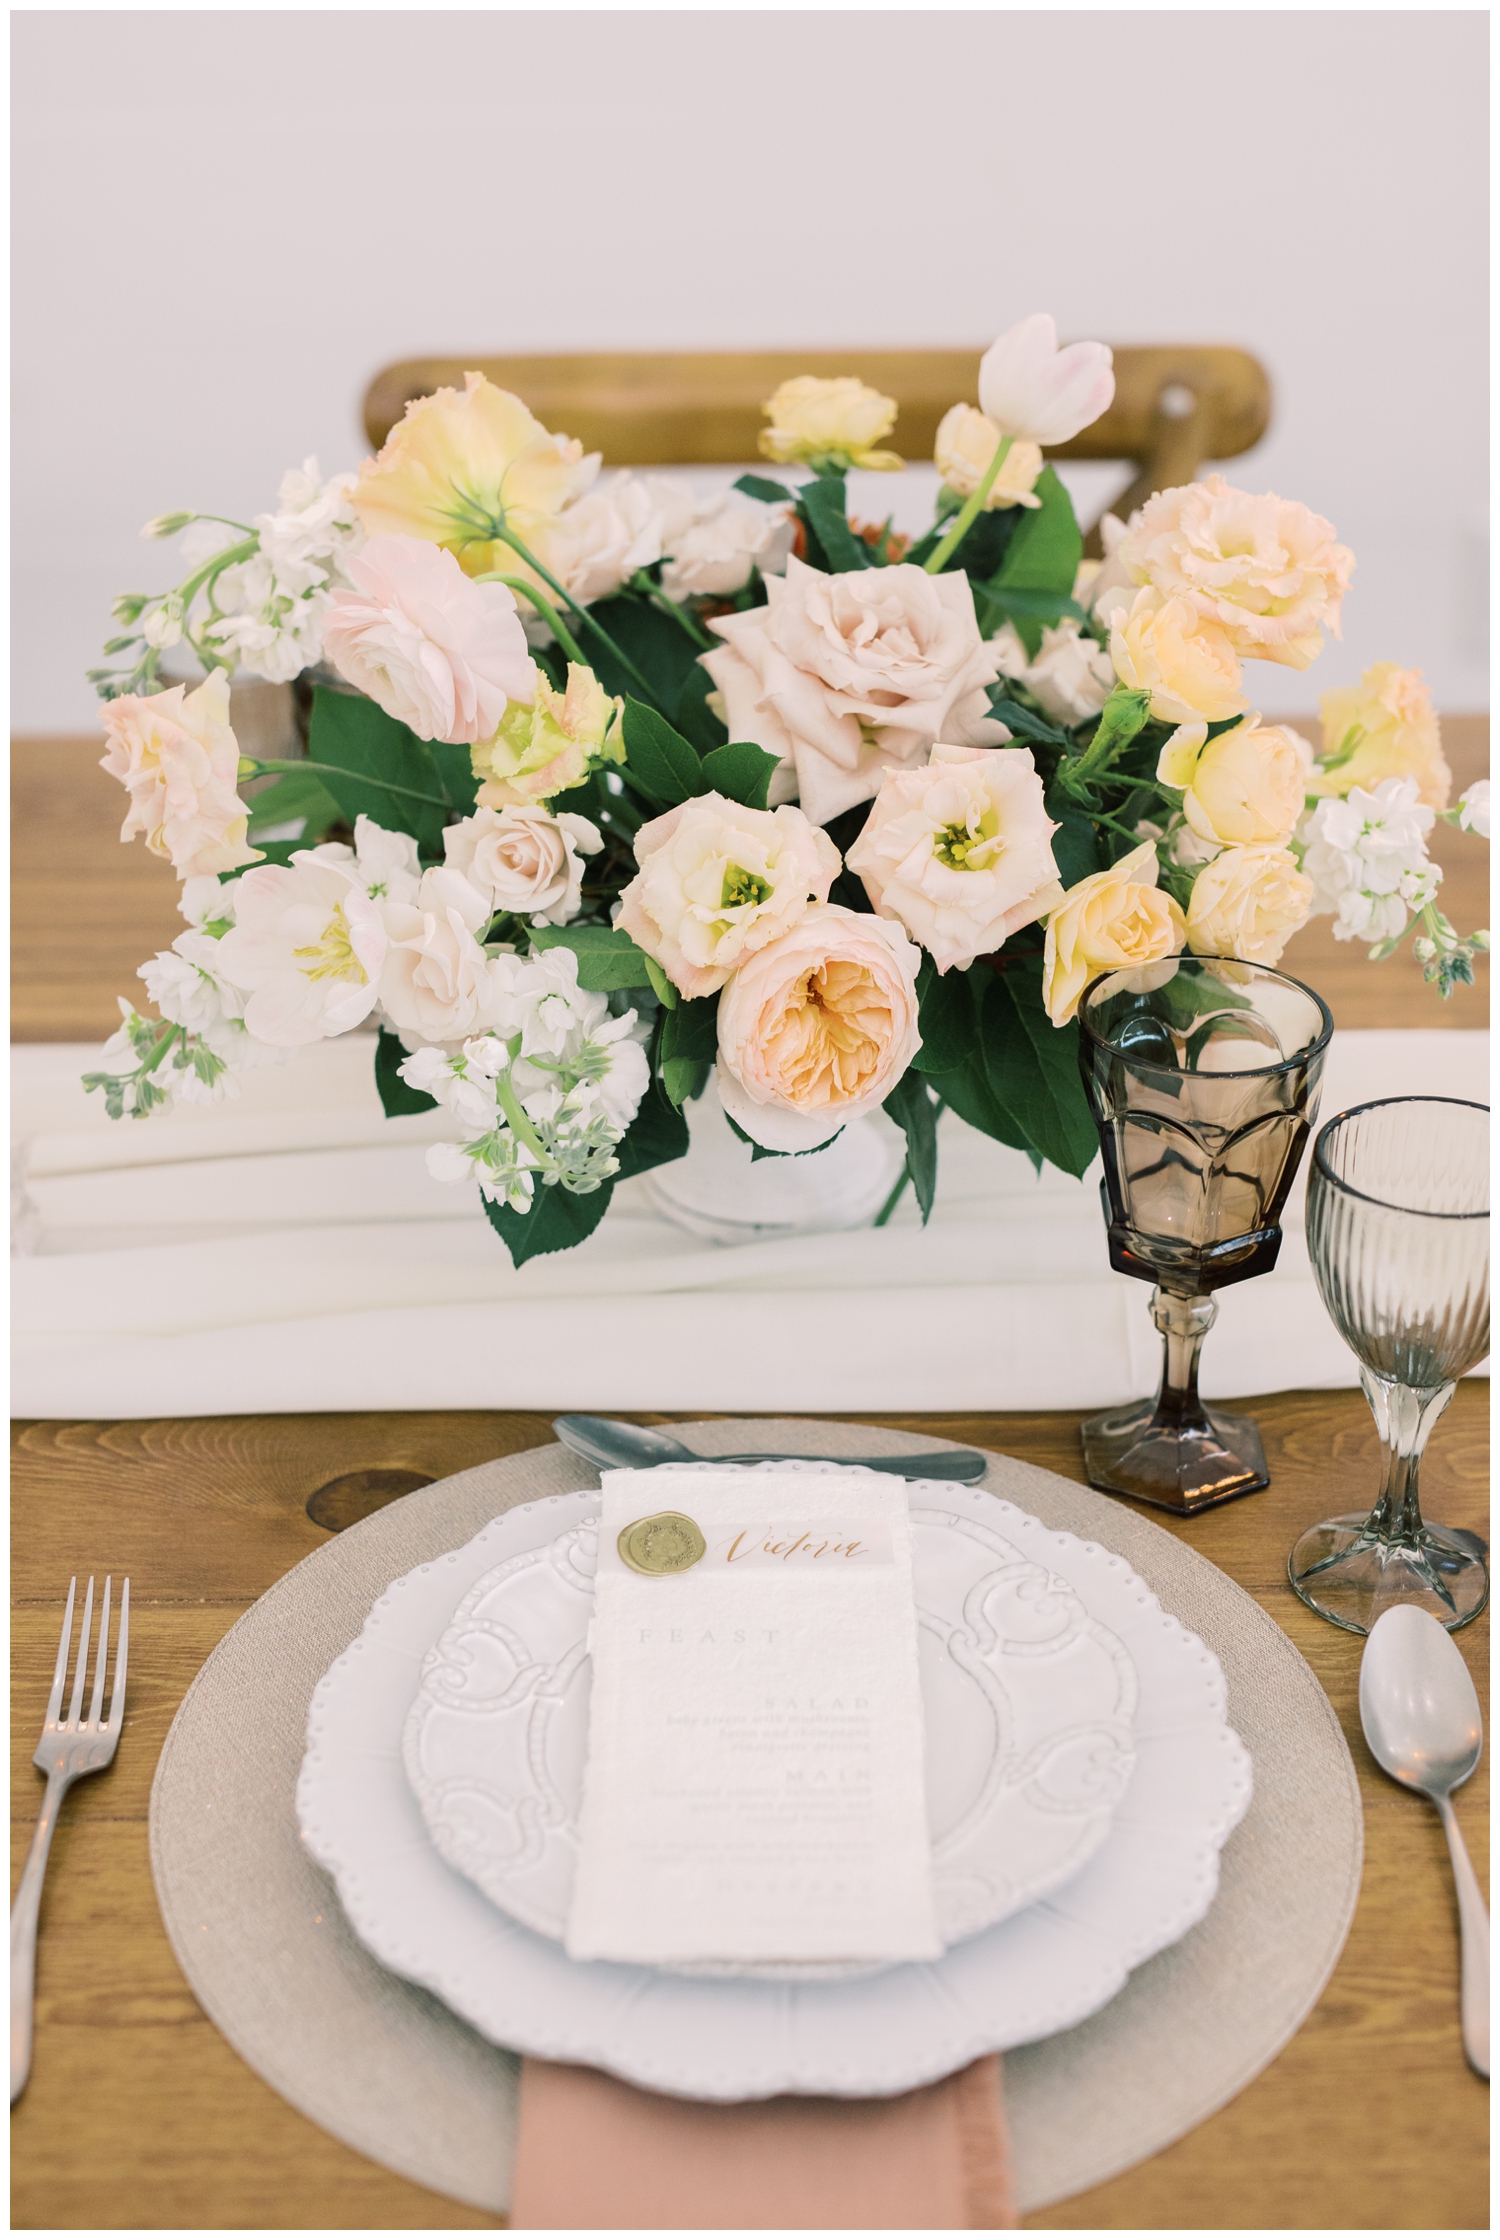 place setting for wedding reception with menu card and florals